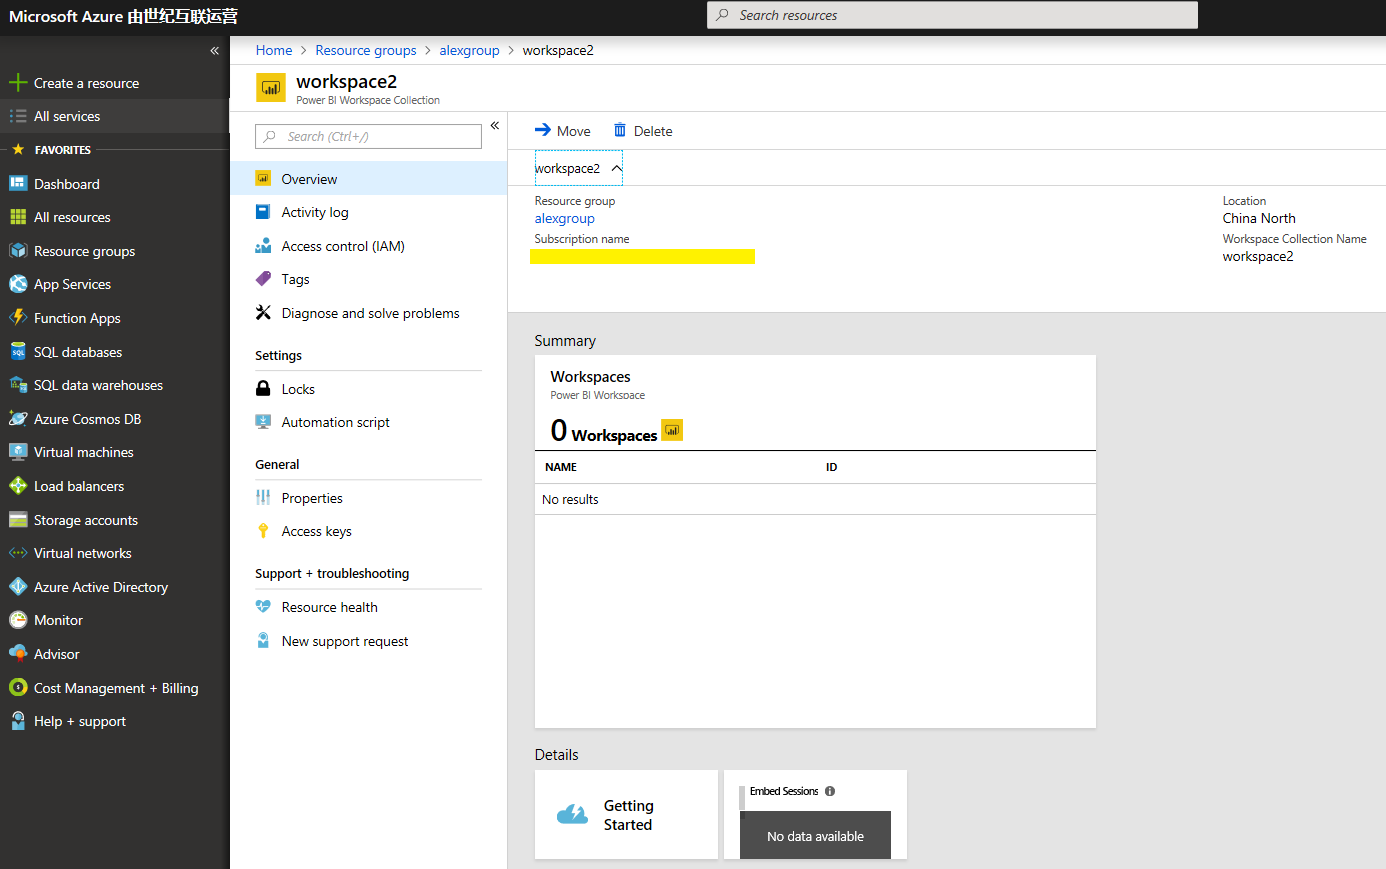 Workspace collection in the Azure portal